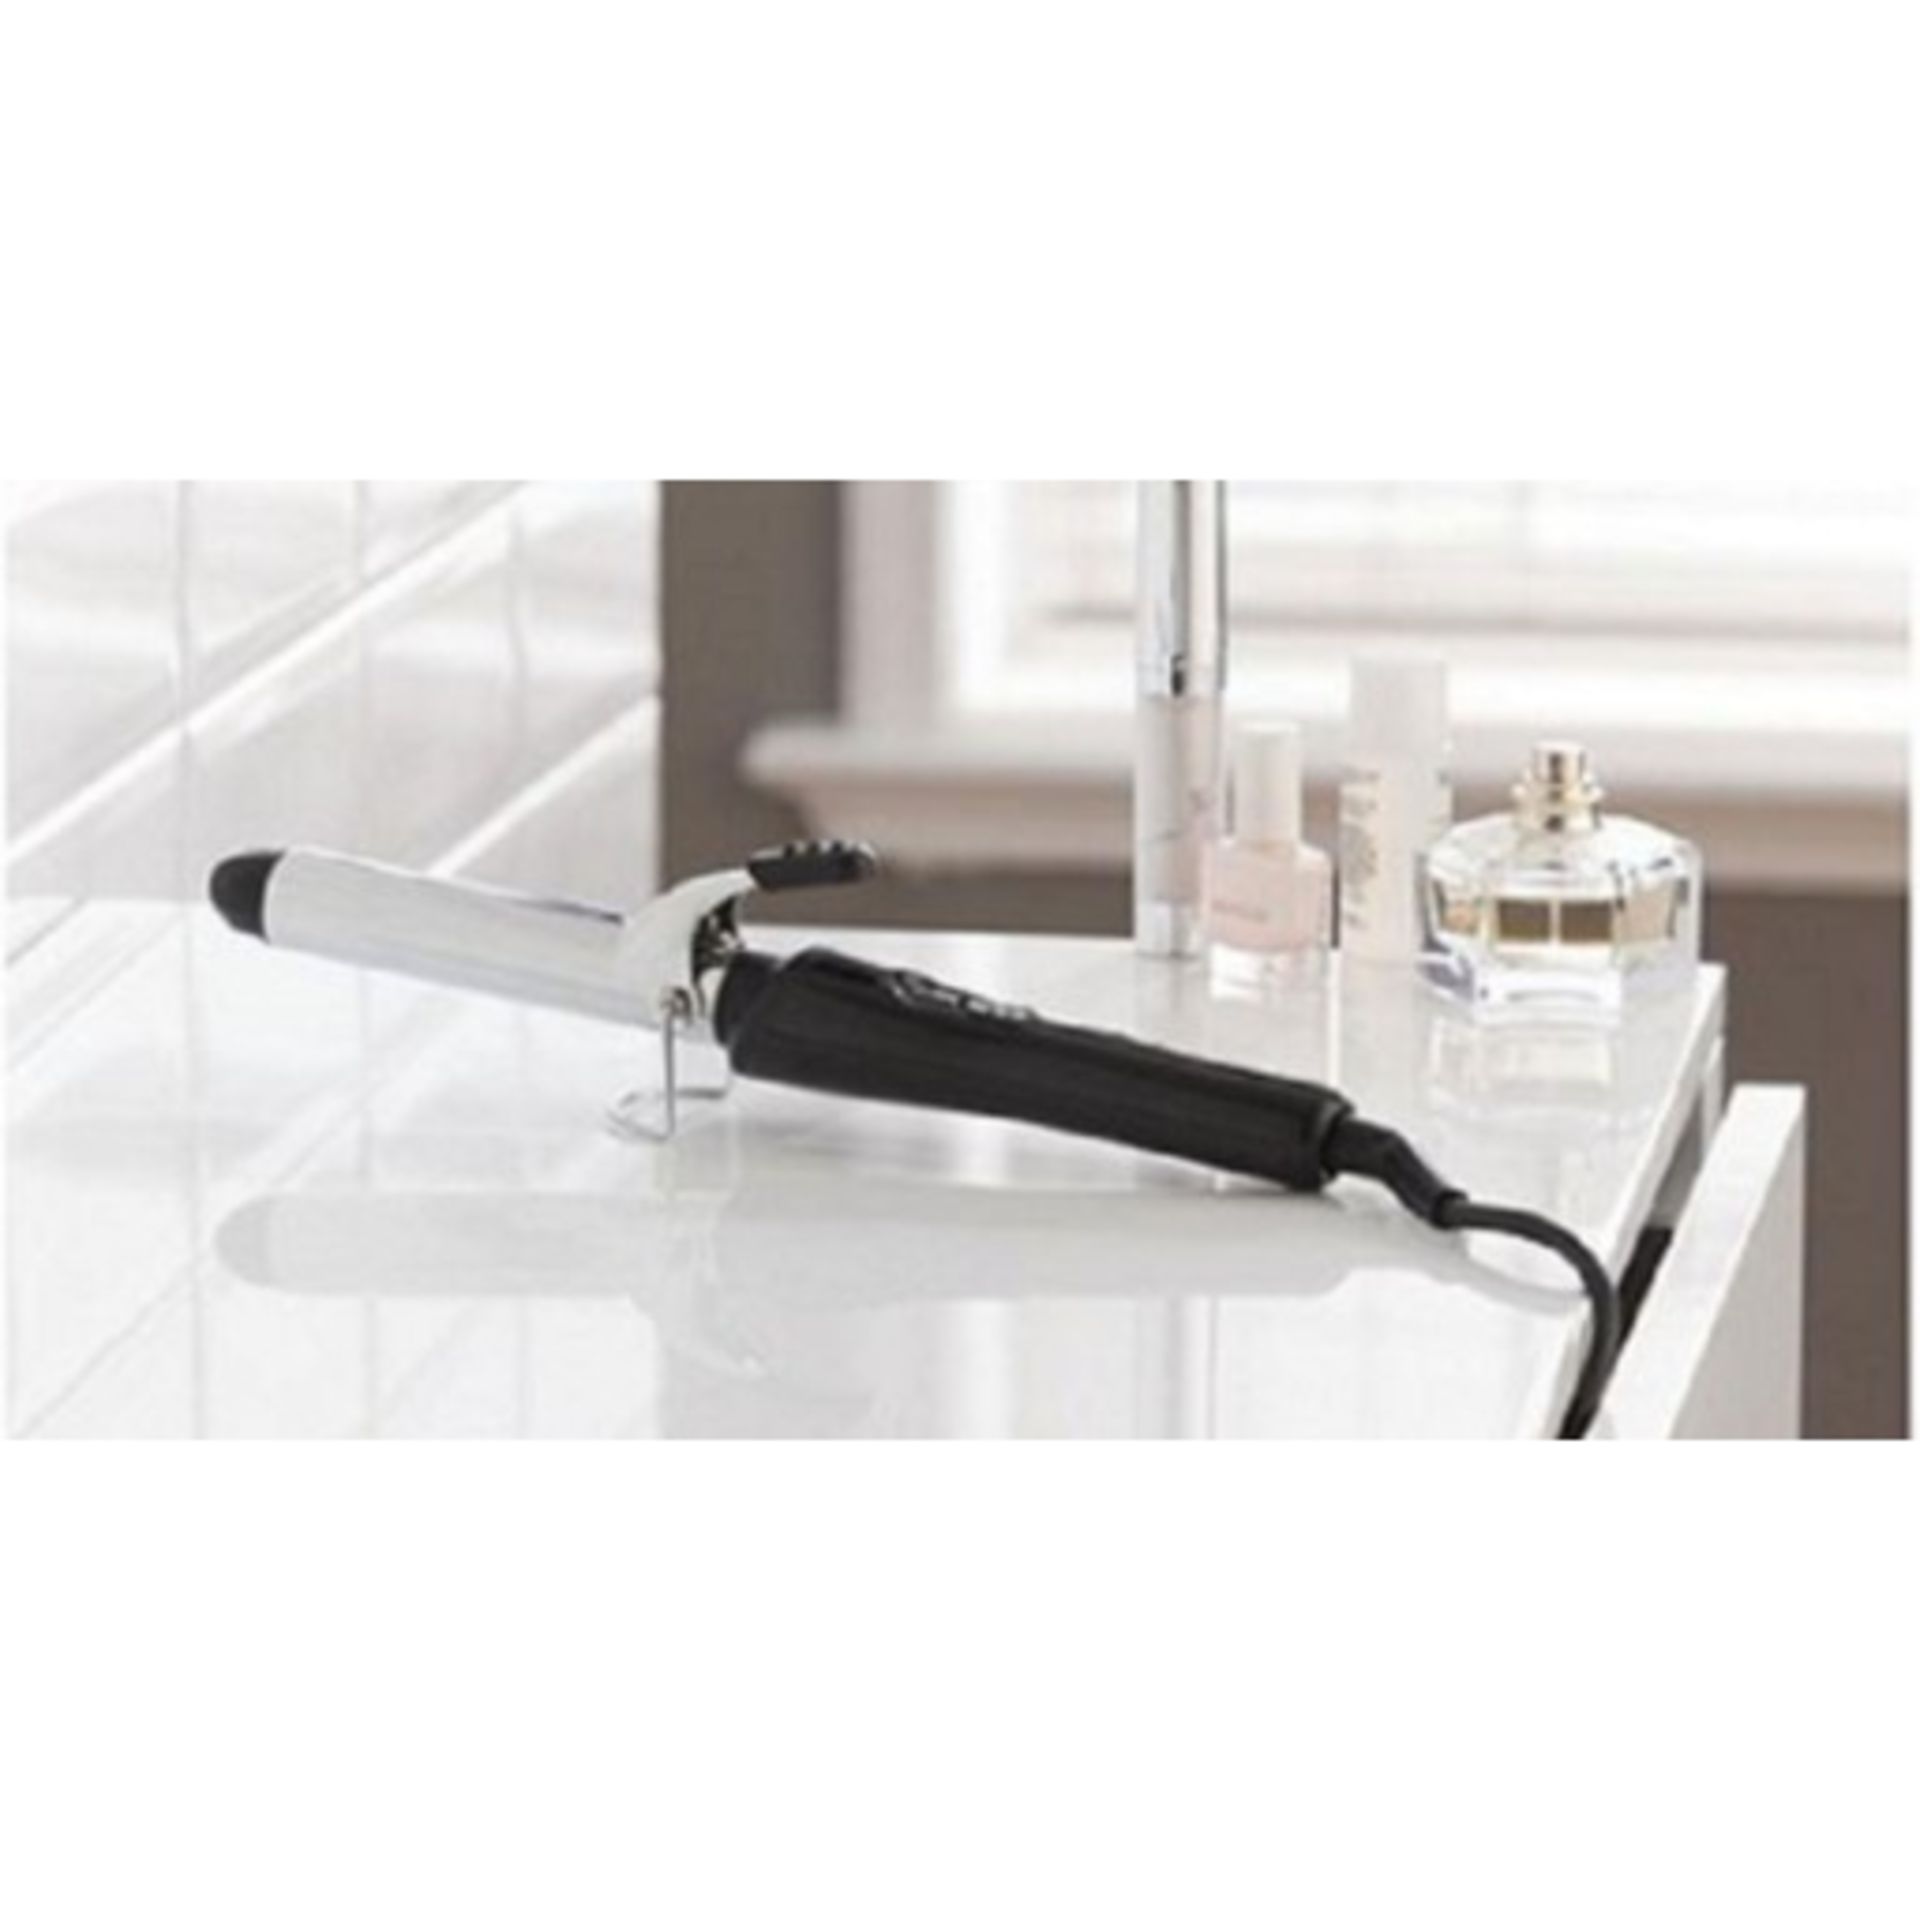 V *TRADE QTY* Brand New 25mm Curling Tongs with 2 meter Swivel Cord - Heats Up to 200 Degrees